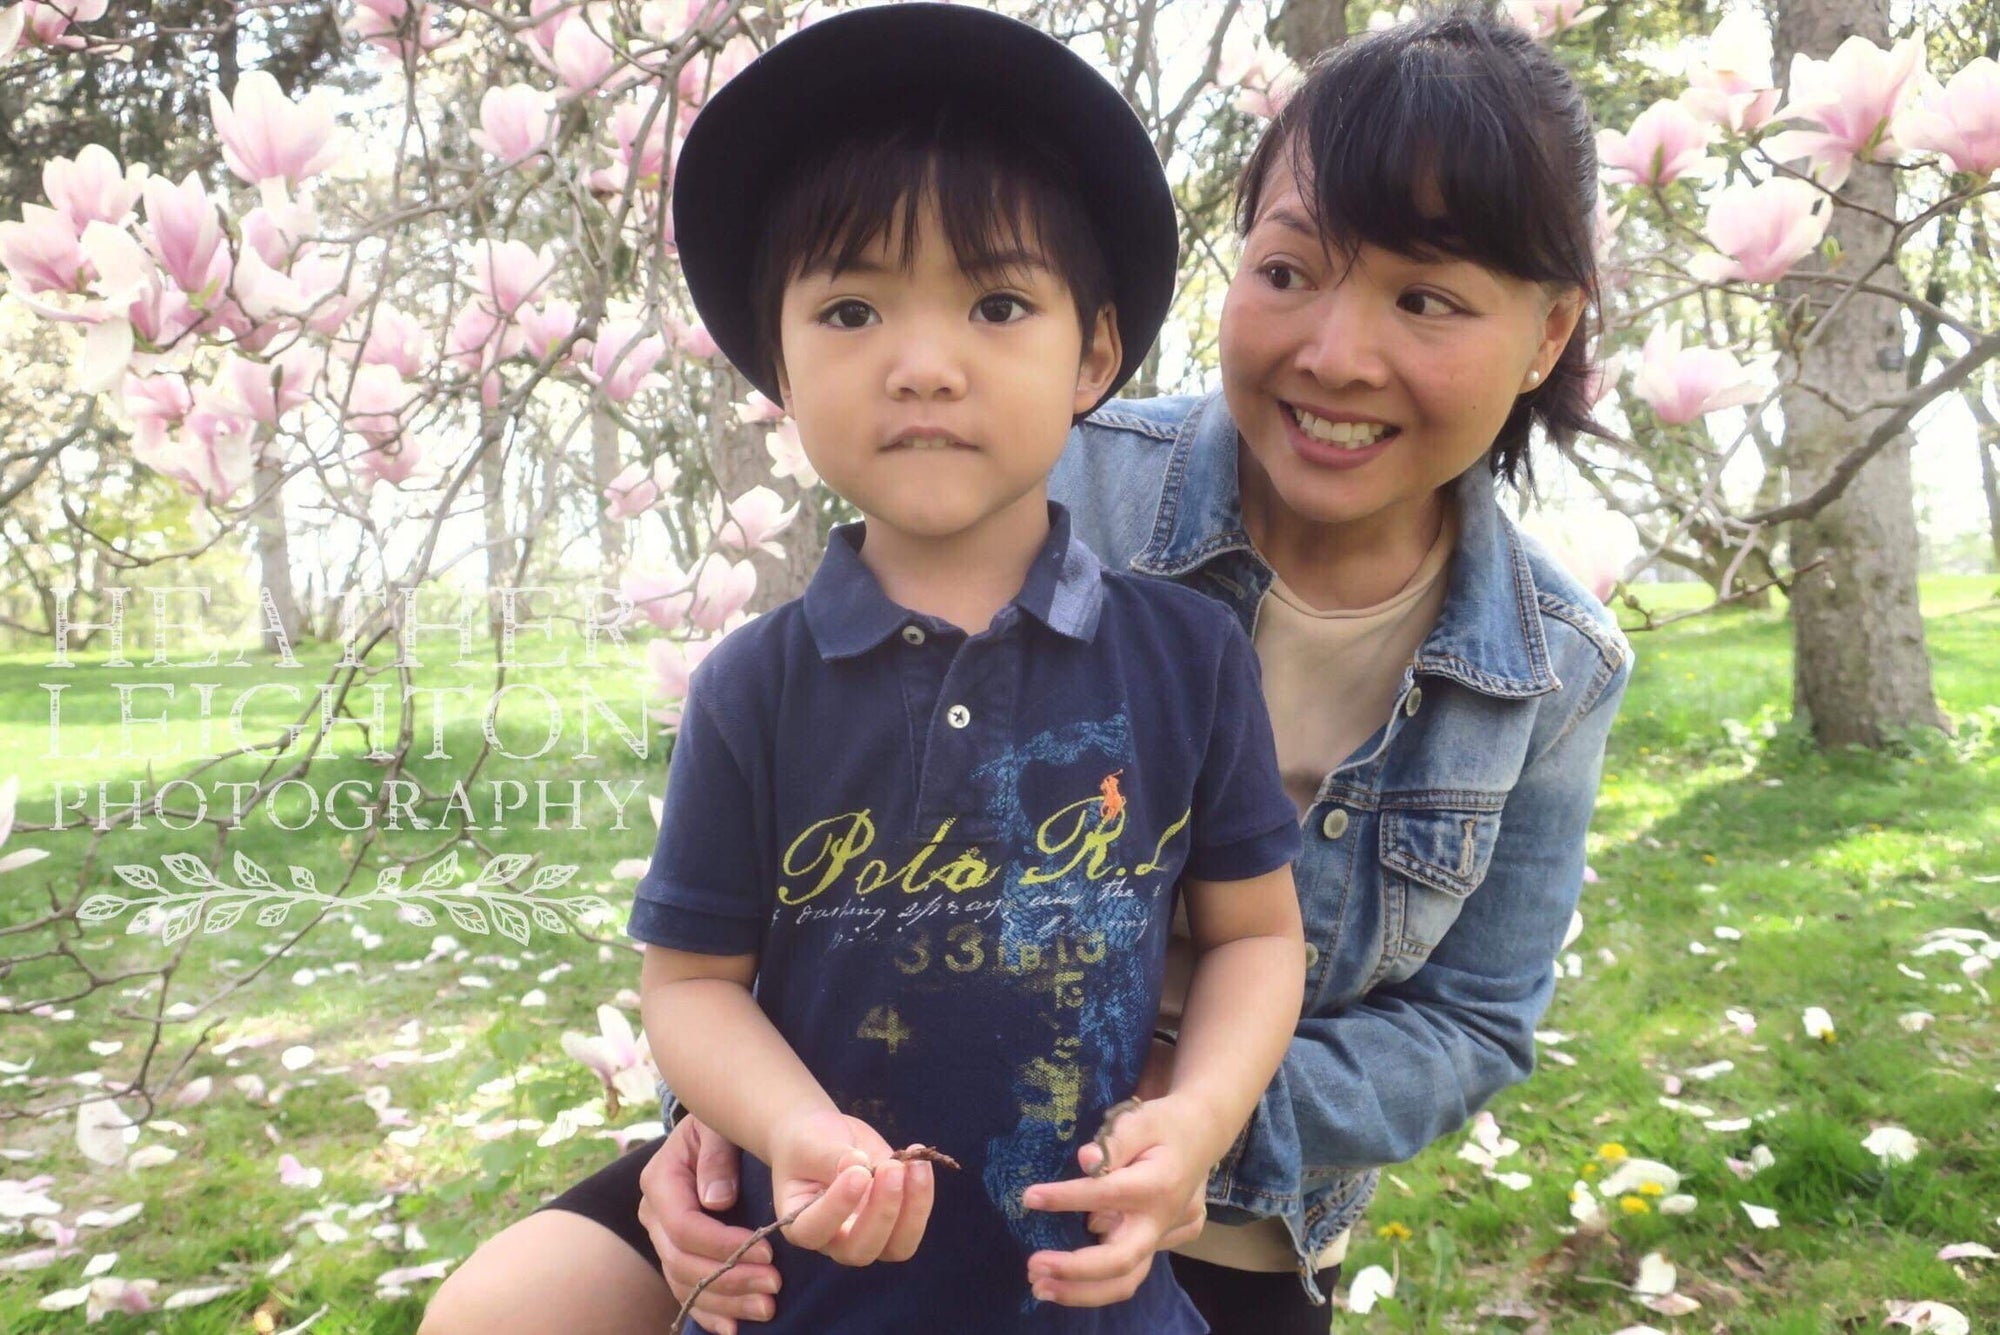 #OhhMoments: Allergy Momma Hiromi shares how her son Roman's eczema was the first indicator of a food allergy